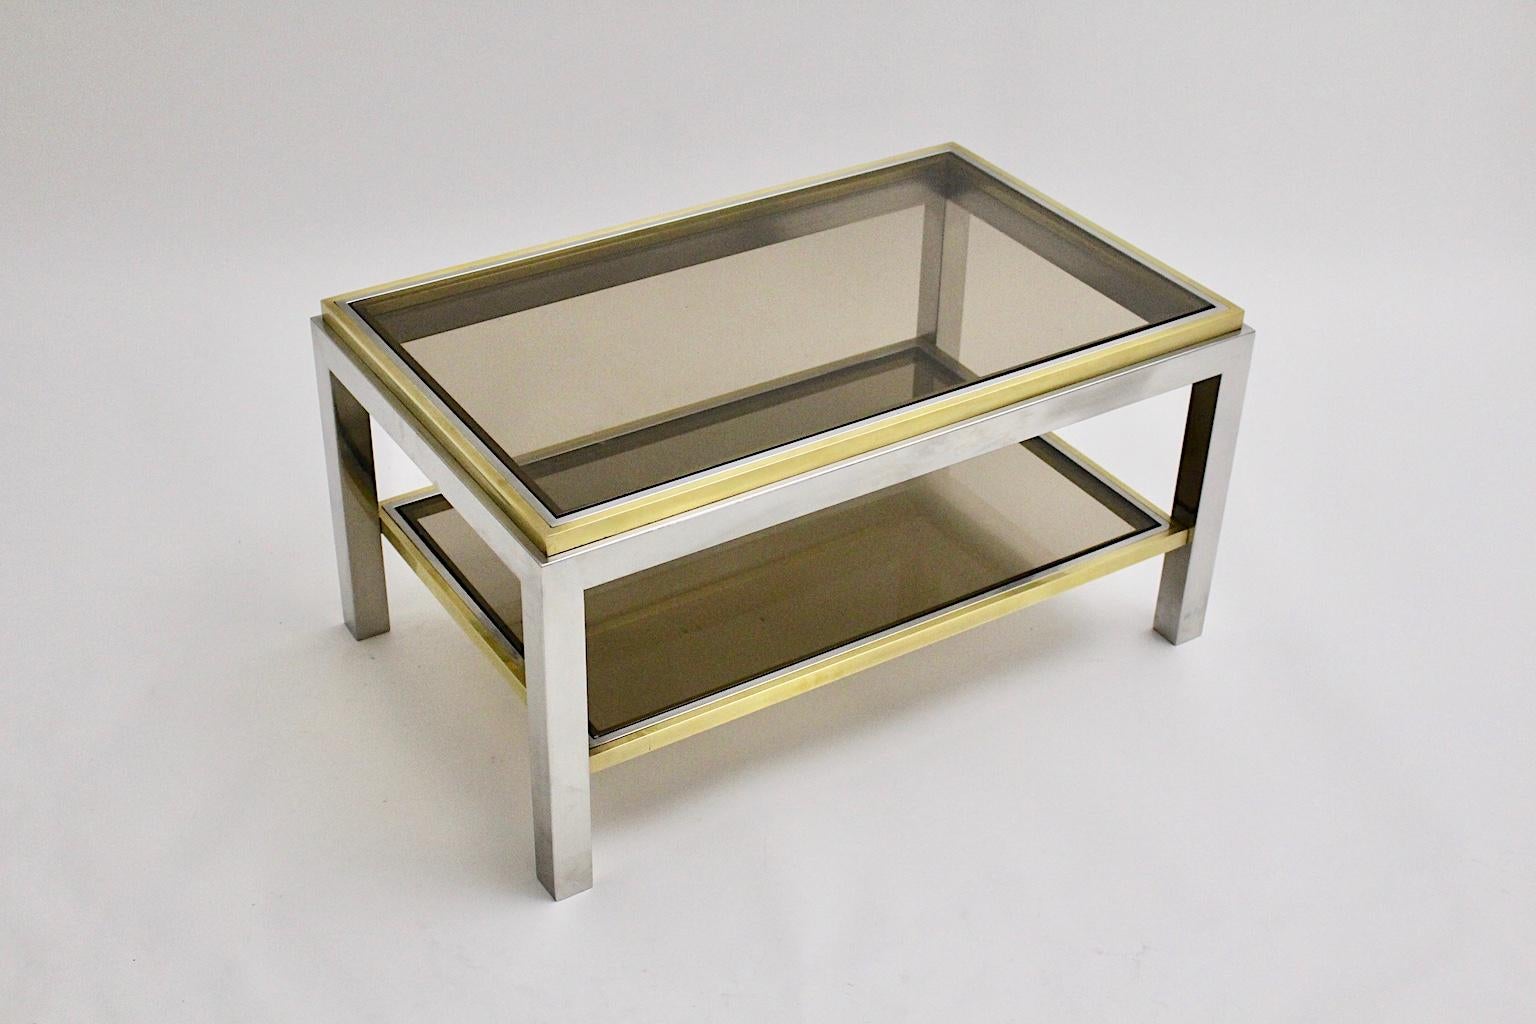 Italian Mid-Century Modern Brass Chrome Coffee Table by Willy Rizzo Signed 1970s Italy For Sale